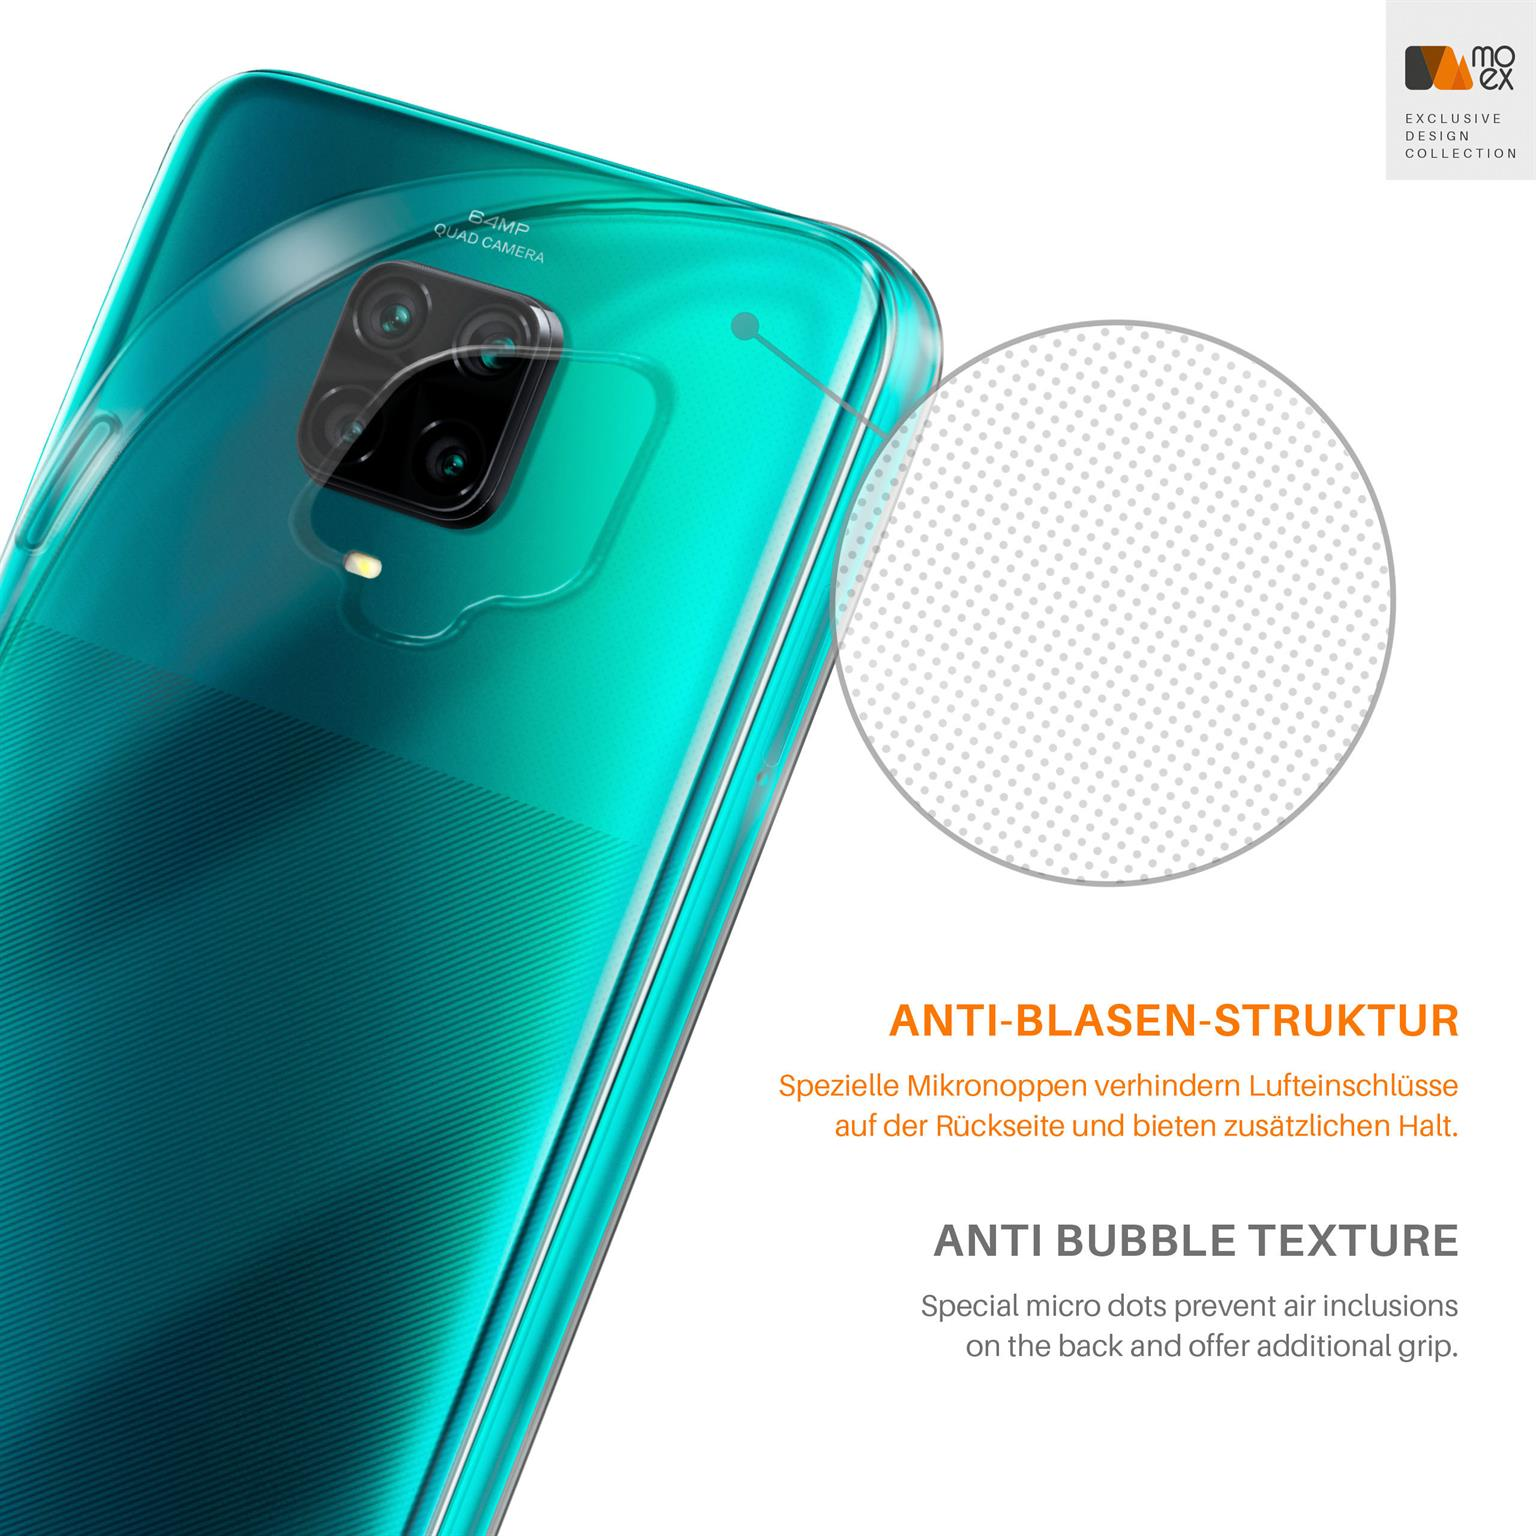 Pro, Backcover, Case, Crystal-Clear Xiaomi, MOEX 9 Redmi Aero Note